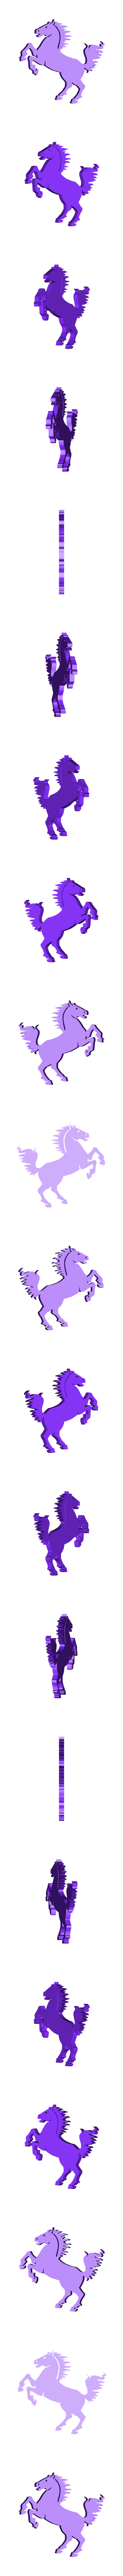 horse.stl Download free STL file Horse Silhouette • 3D print object, 8ran